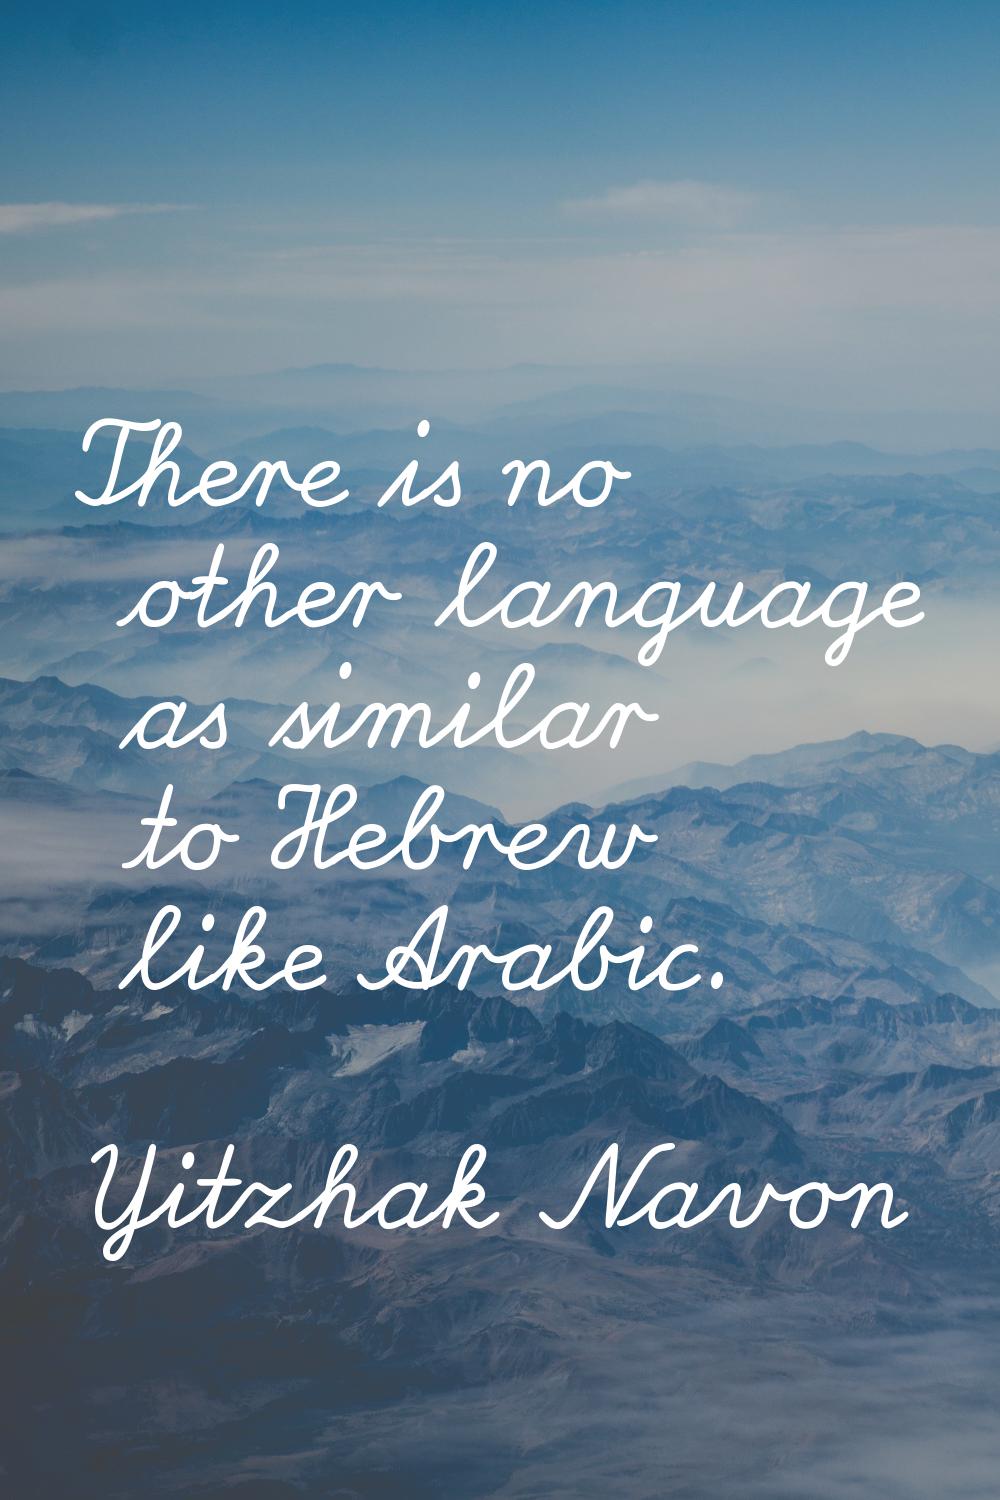 There is no other language as similar to Hebrew like Arabic.